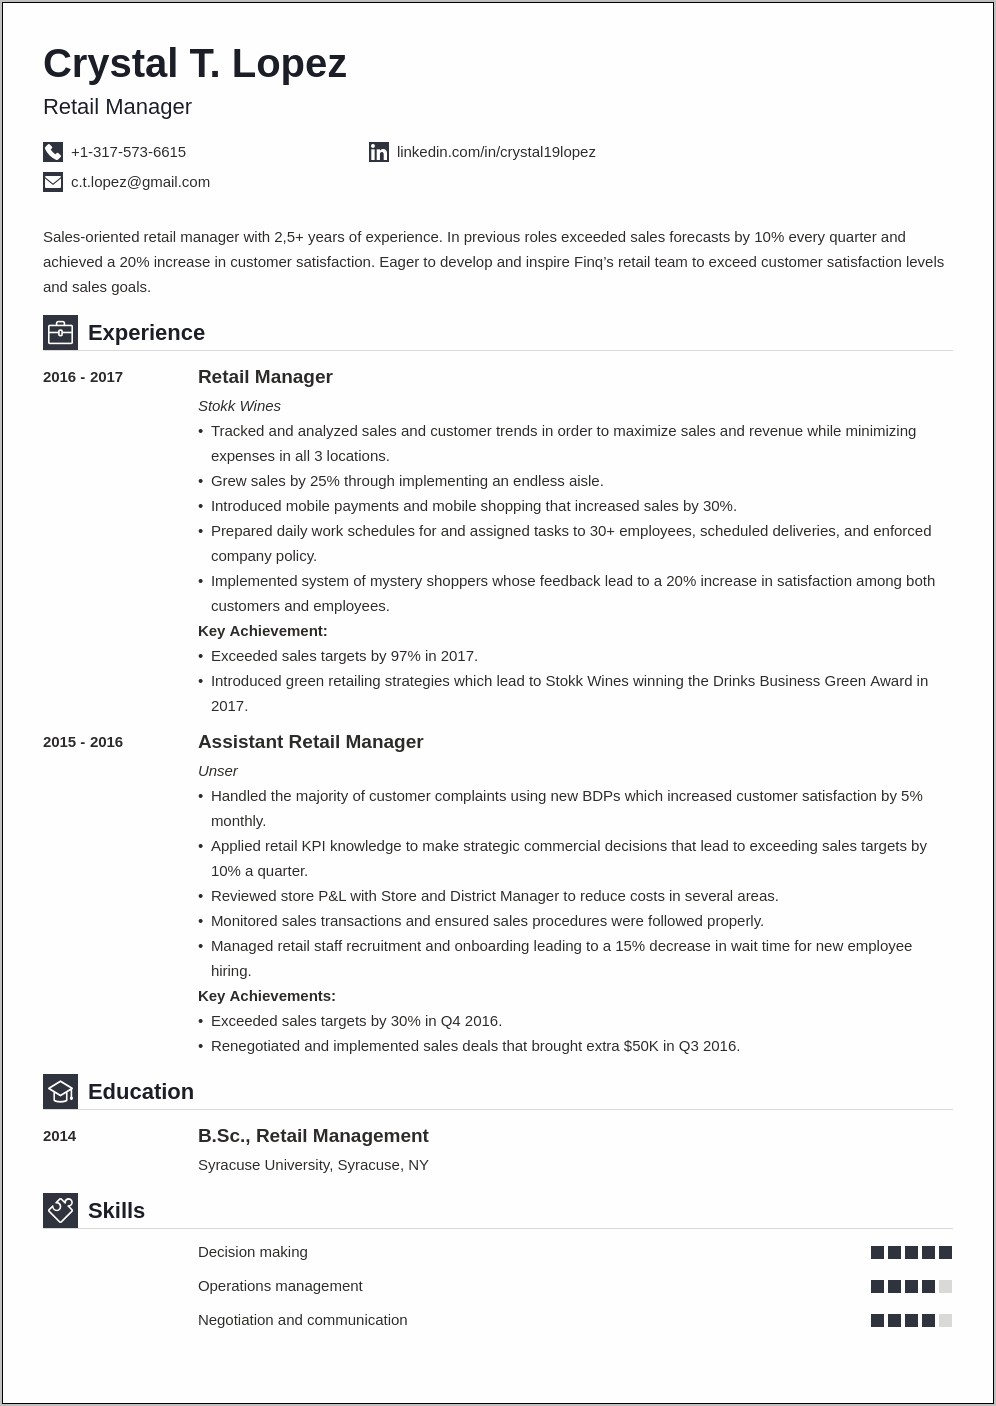 Resume Objective Examples Retail Manager